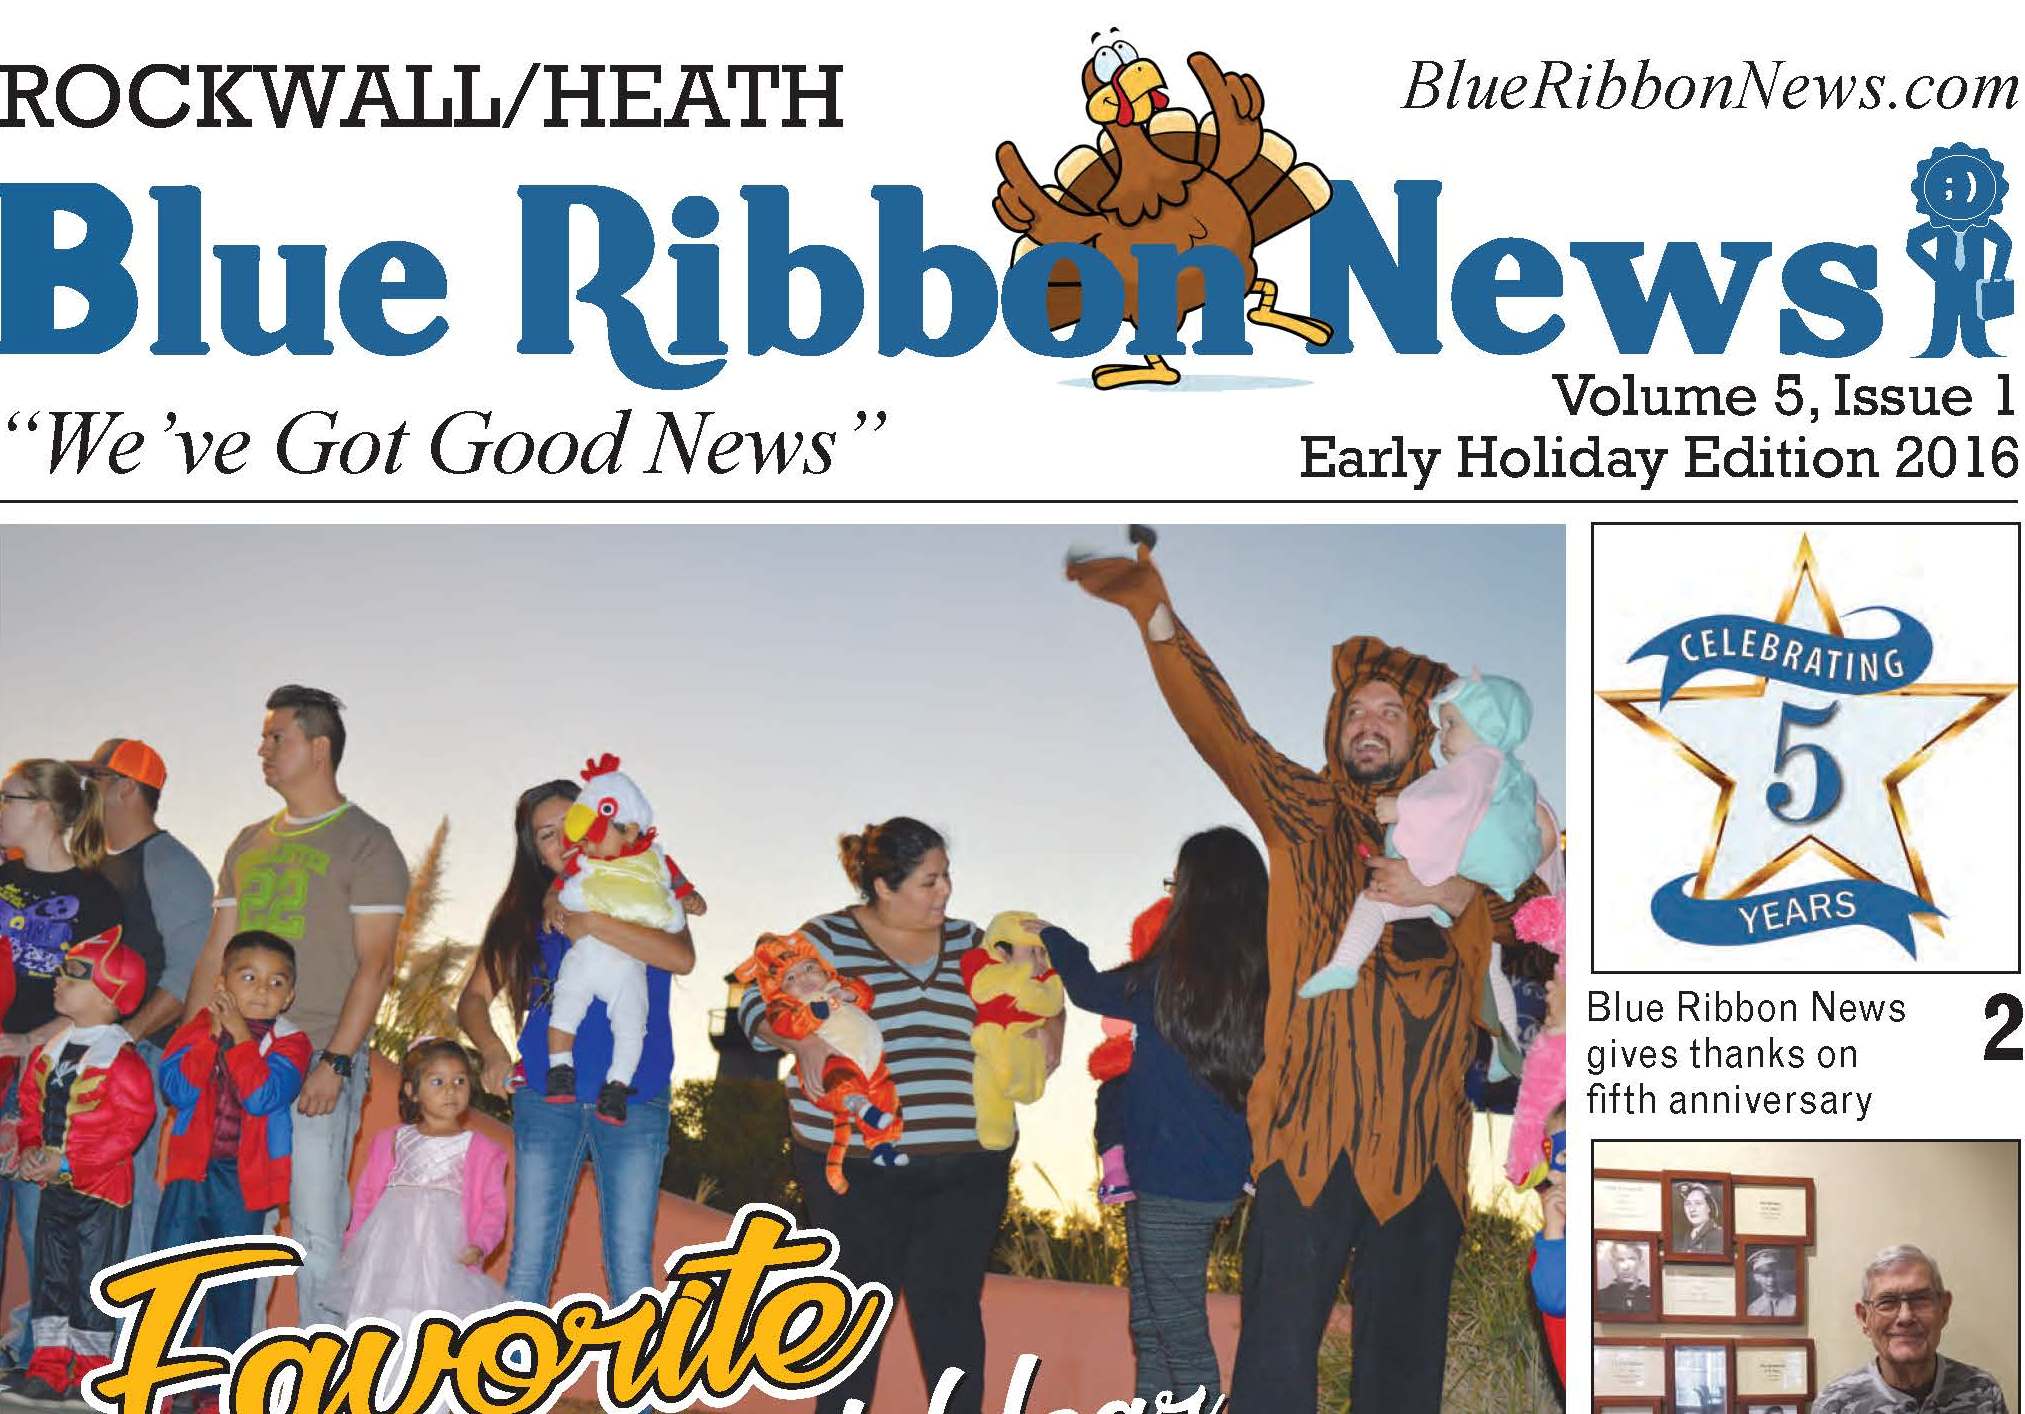 Blue Ribbon News early holiday print edition hits mailboxes throughout Rockwall, Heath